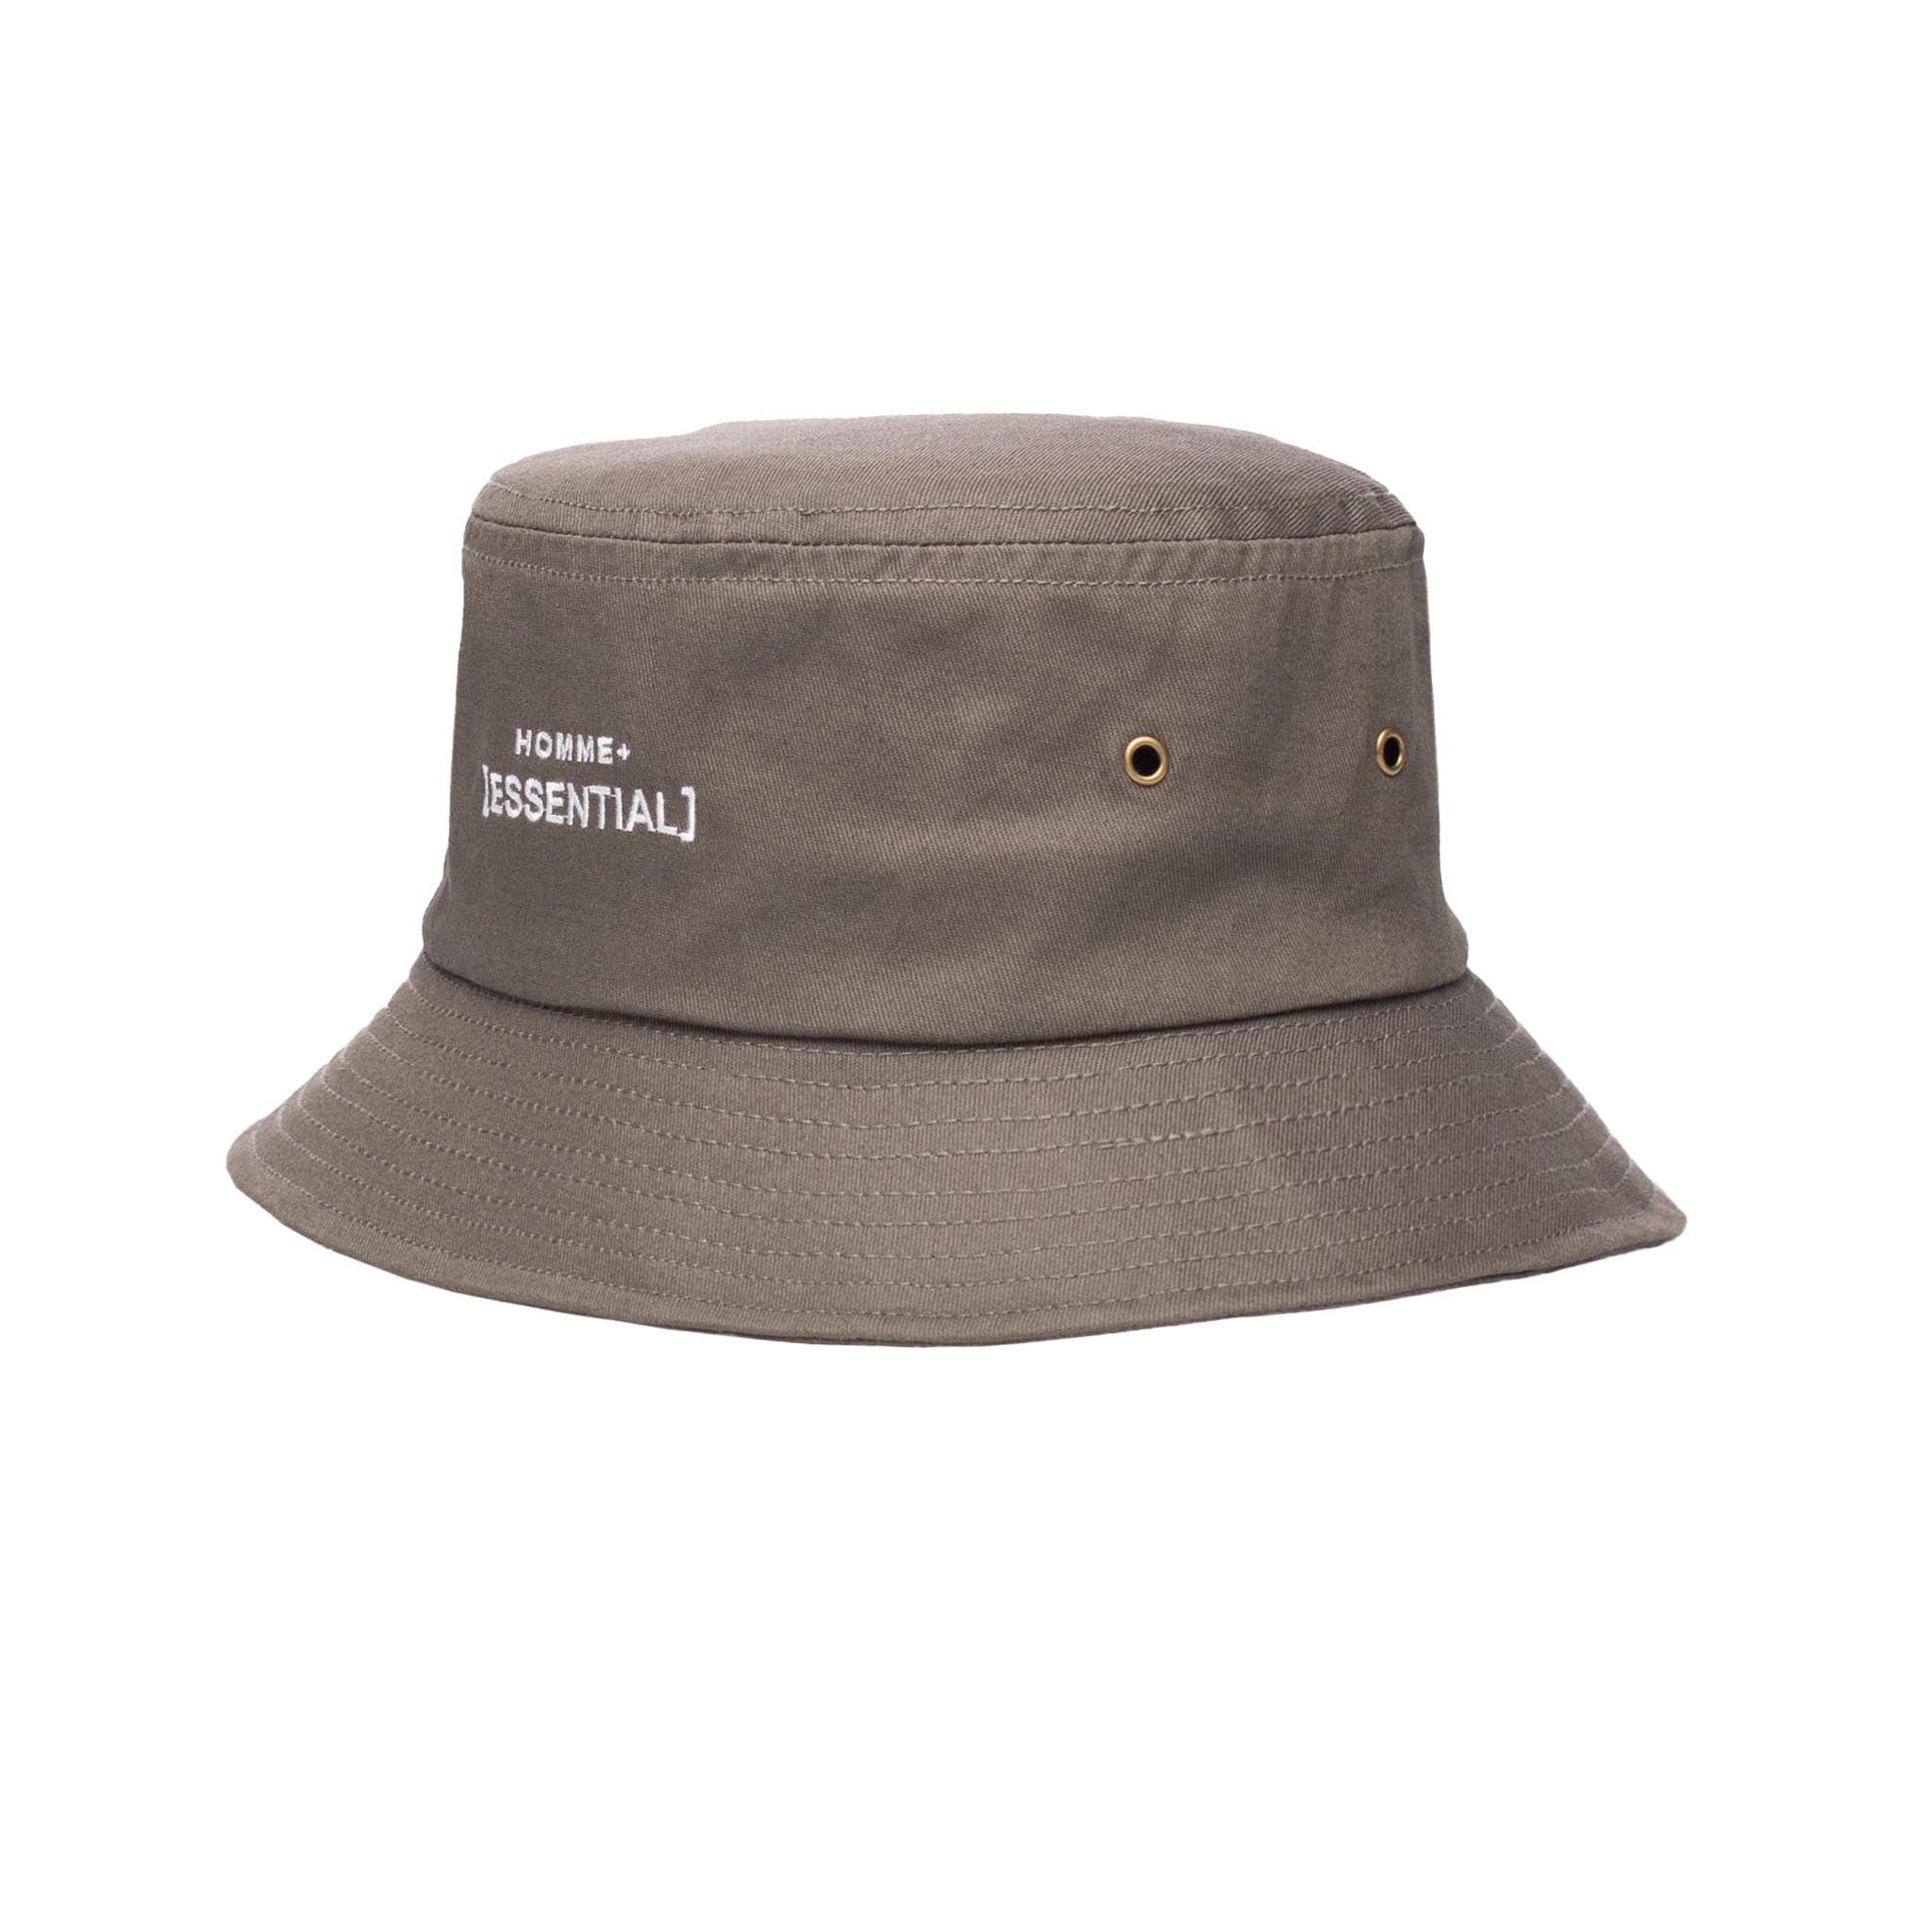 HOMME+ ESSENTIAL Bucket Hat Charcoal/White